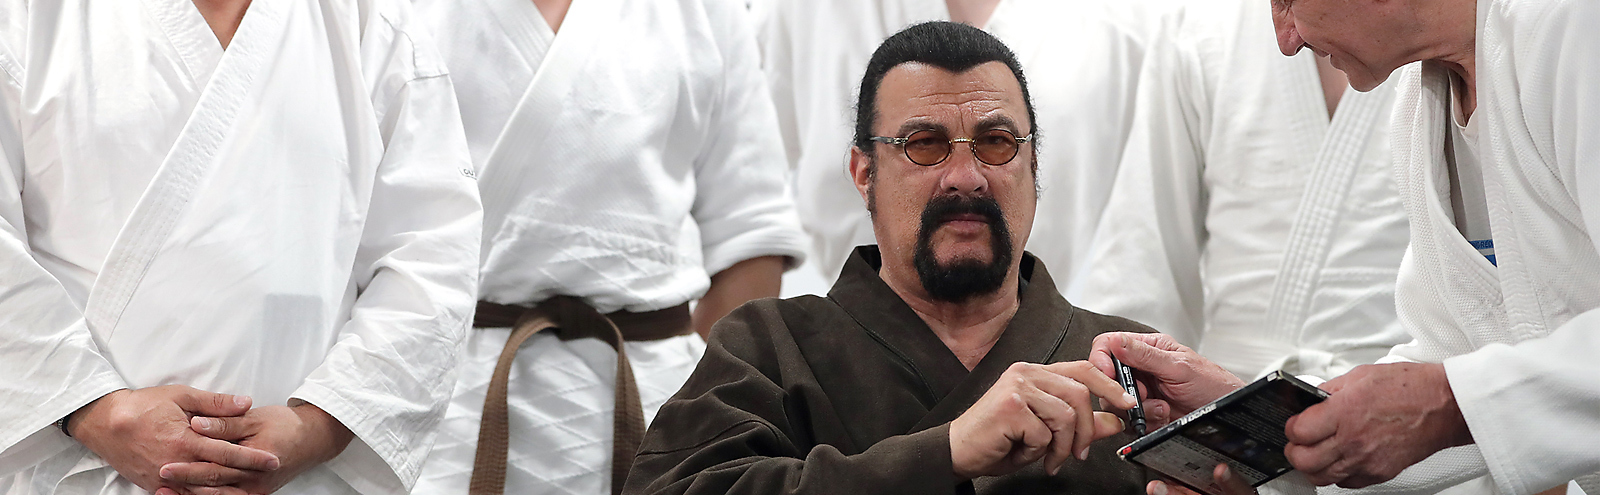 Tank Expert Steven Seagal Is Now The Official Spokesperson For A UAE-Made Armored Truck